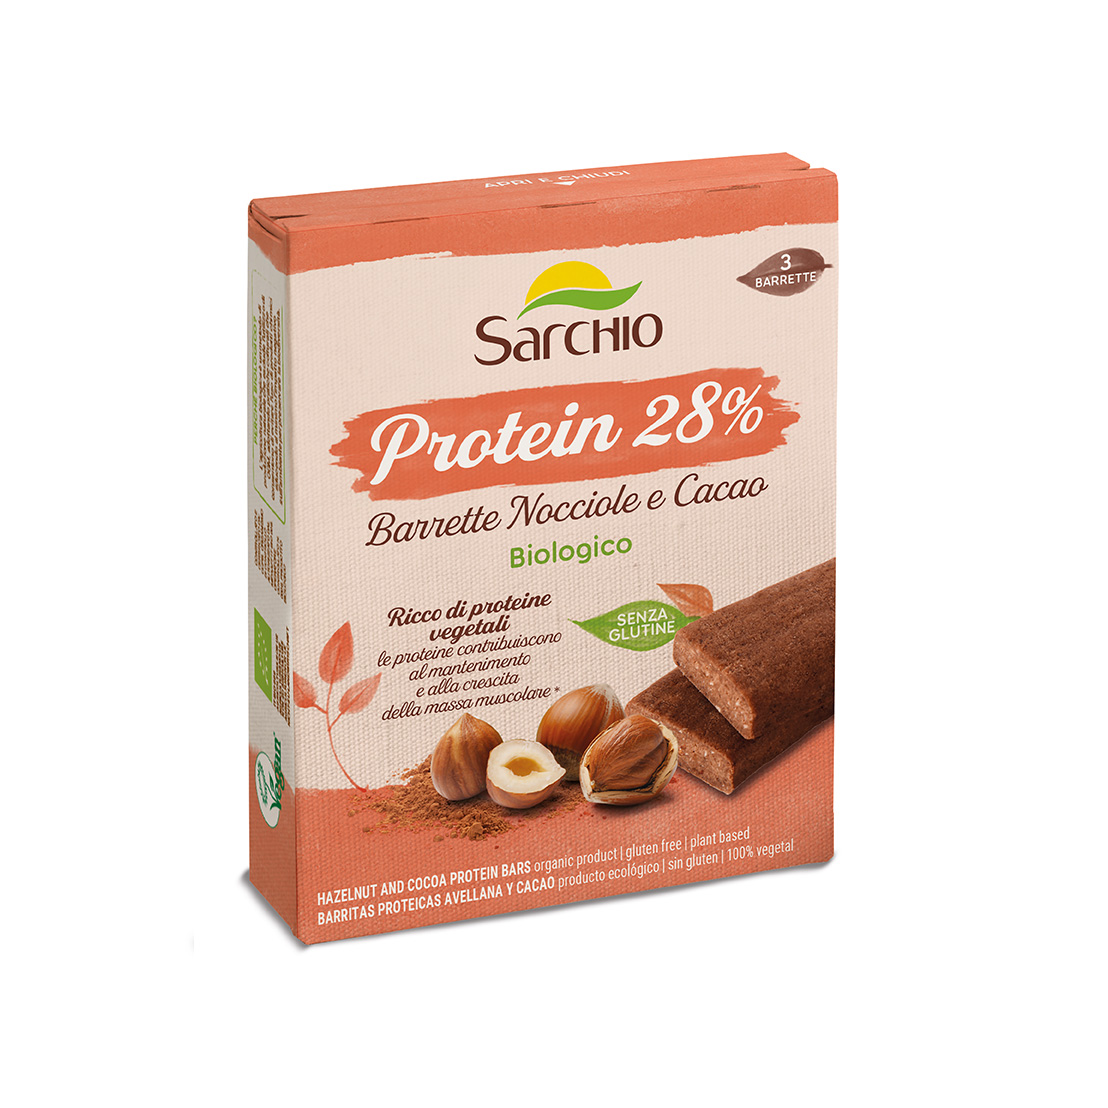 Protein bars <br> Hazelnut and Cocoa